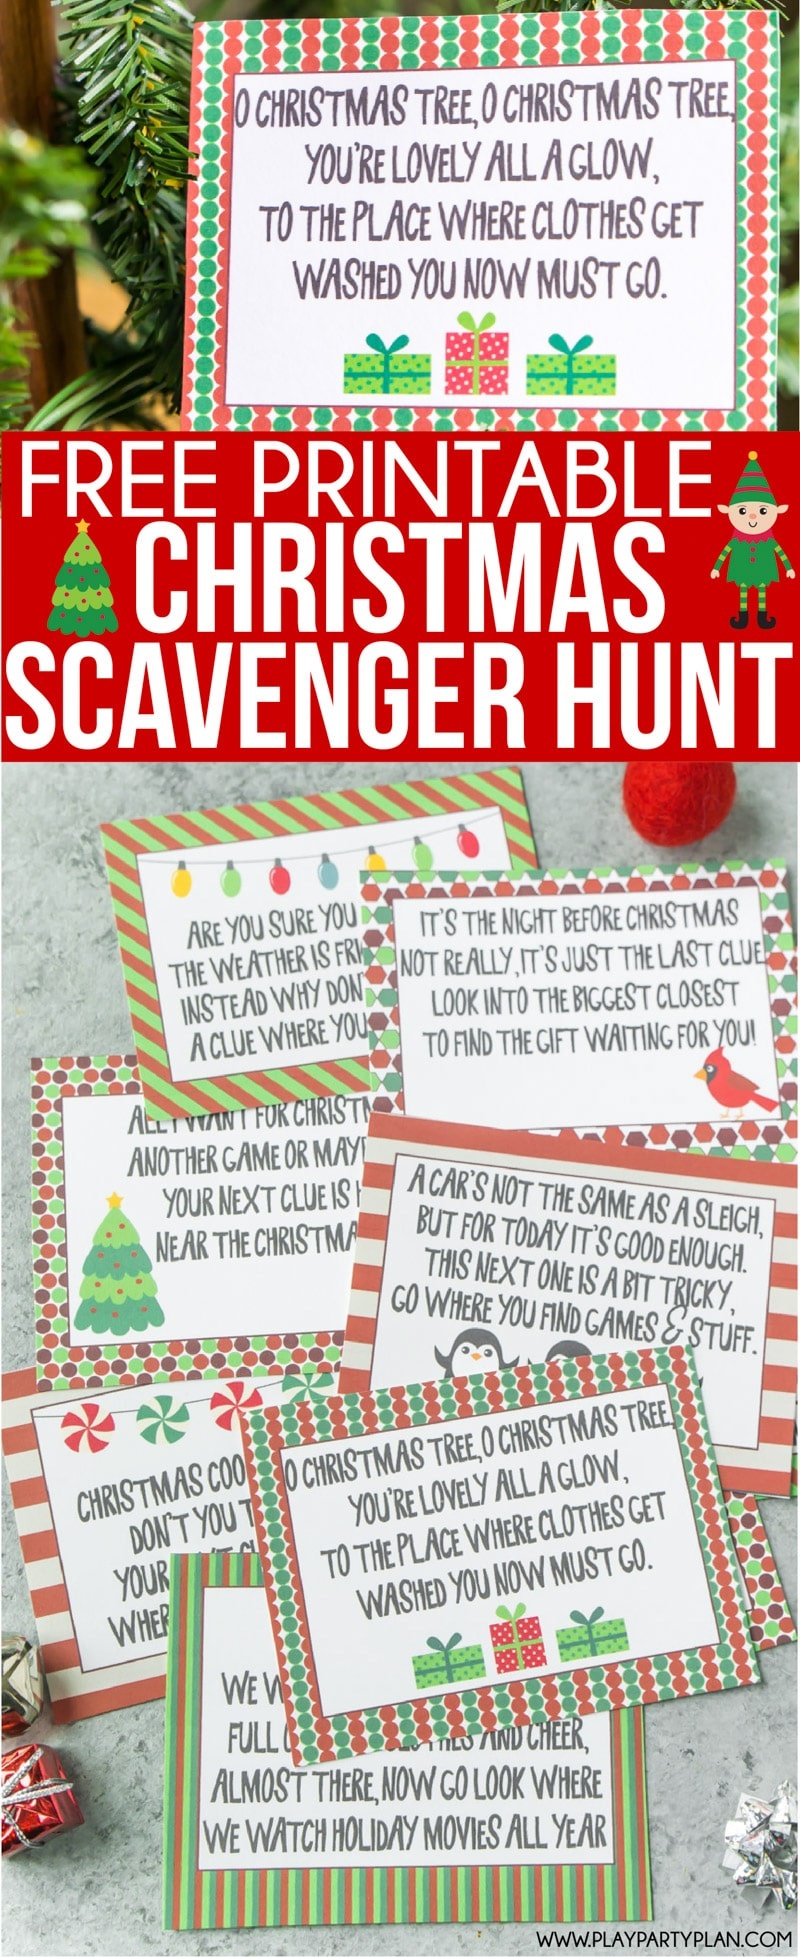 Best Ever Christmas Scavenger Hunt - Play Party Plan - Free Printable Christmas Treasure Hunt Clues